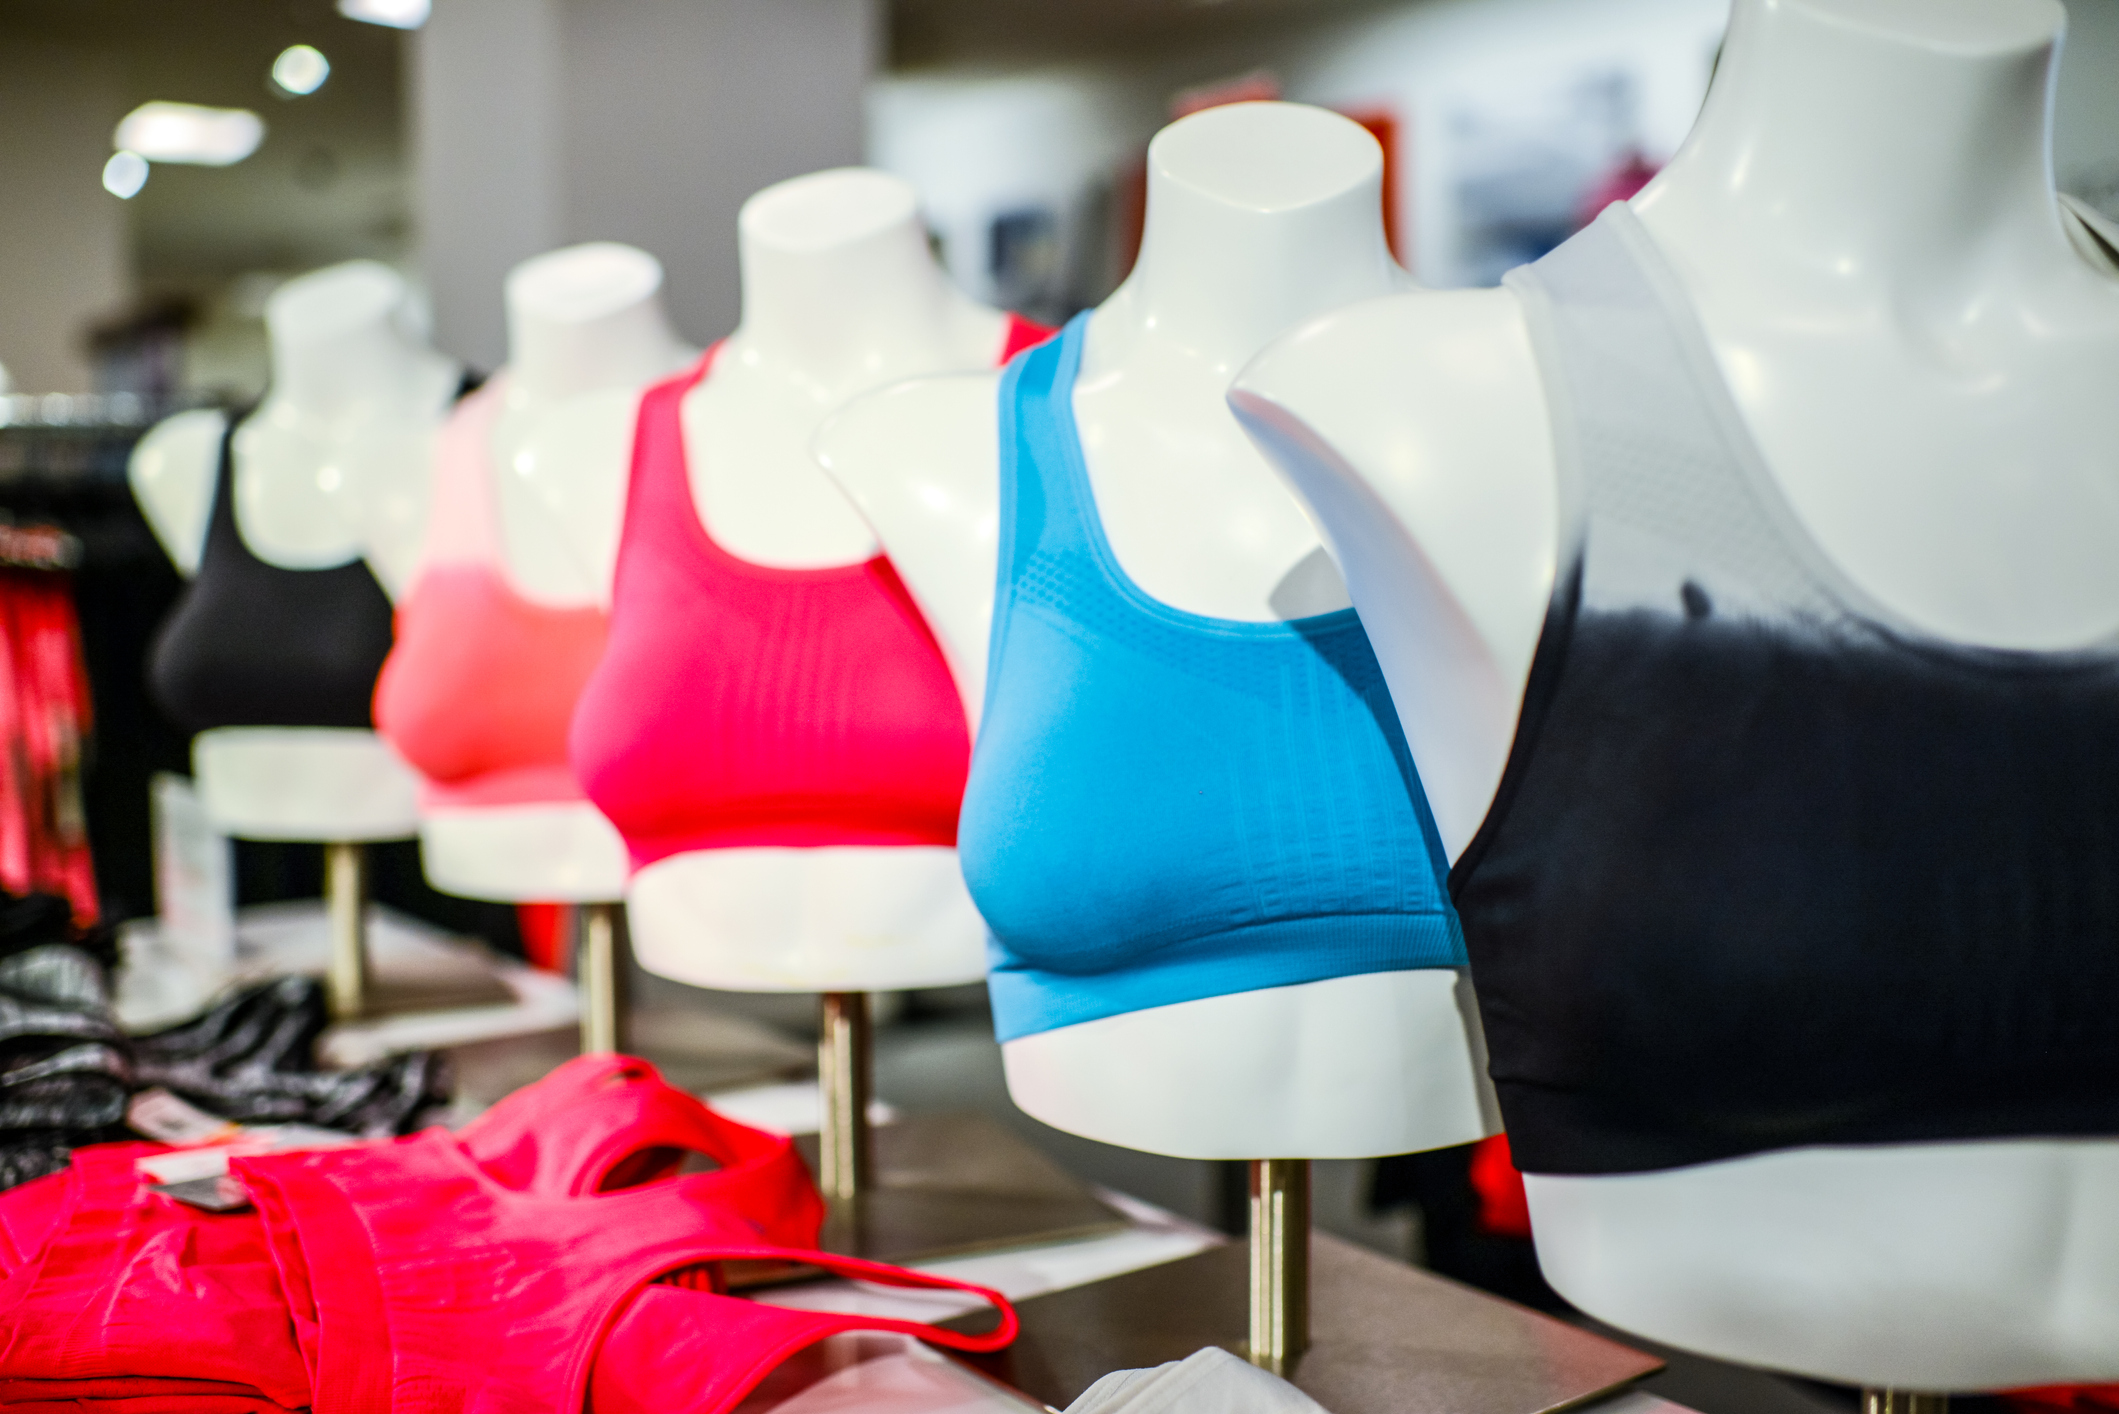 High Levels Of Toxic Chemicals Have Been Found In Sports Bras And